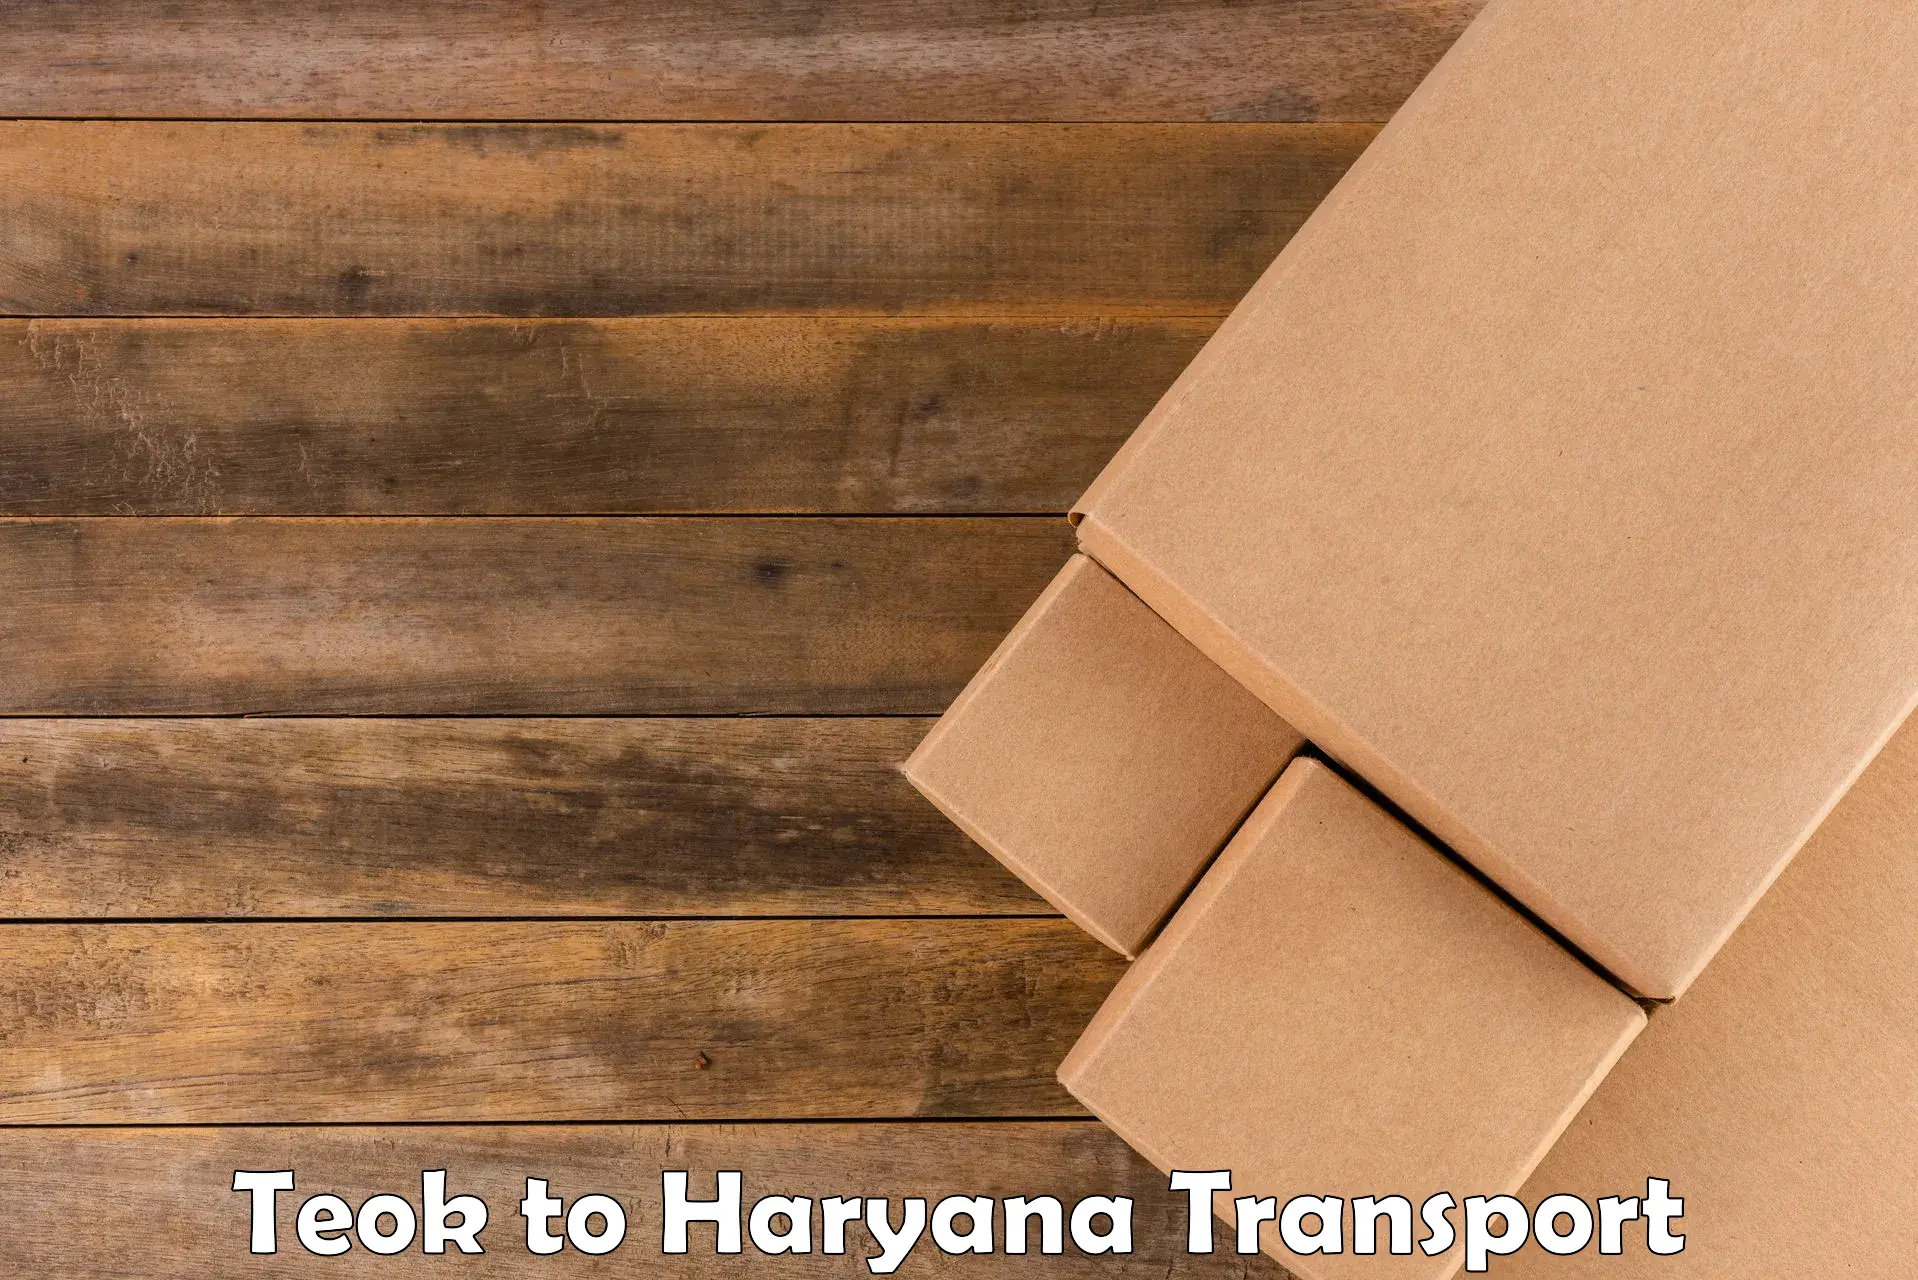 Online transport booking Teok to Chaudhary Charan Singh Haryana Agricultural University Hisar